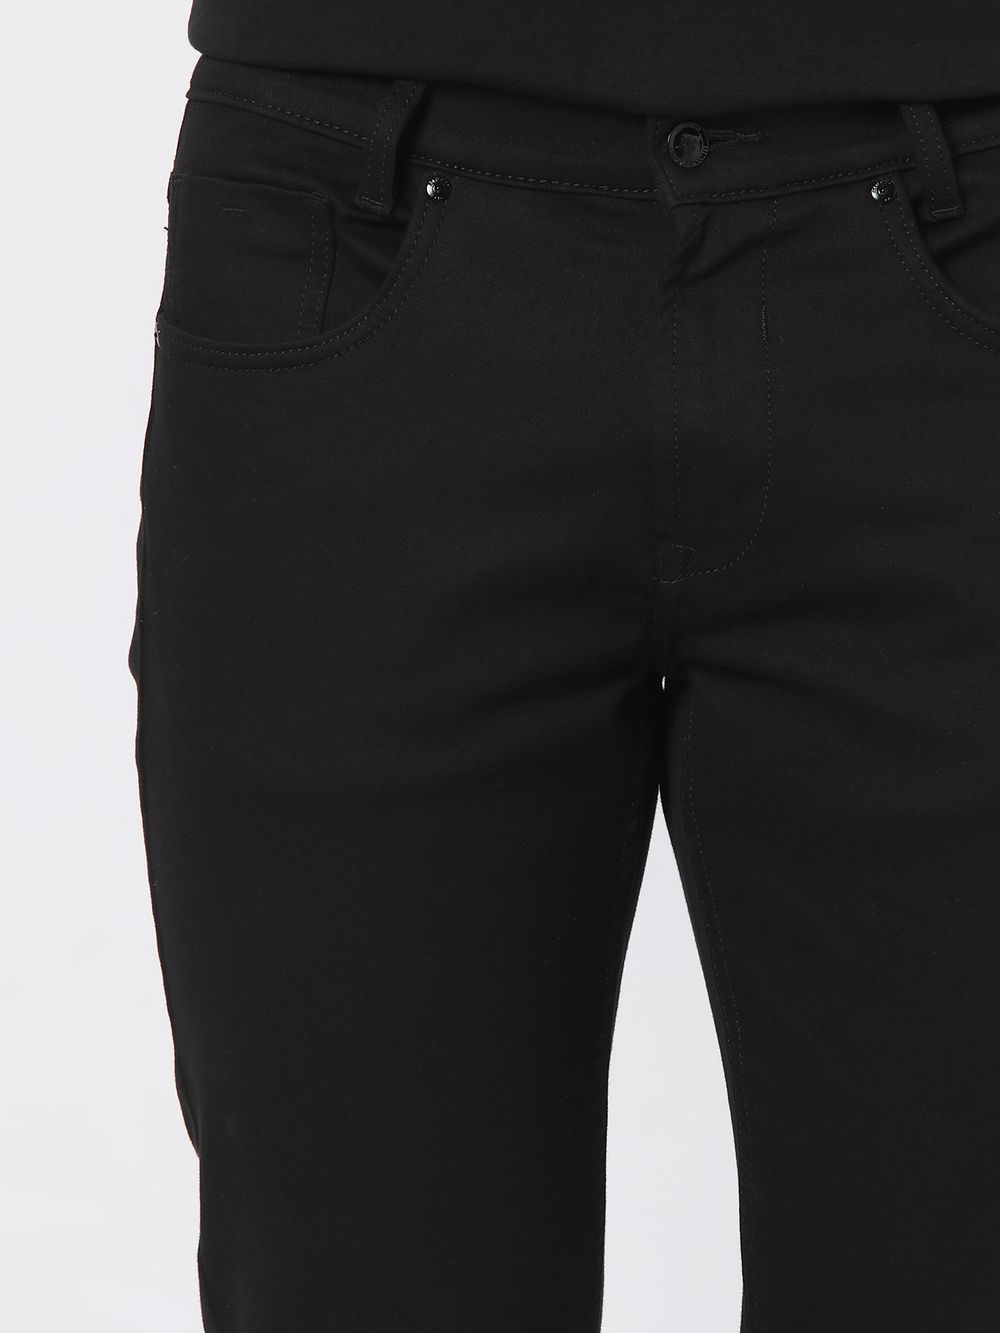 Jet Black Straight Fit Denim Deluxe Stretch Jeans